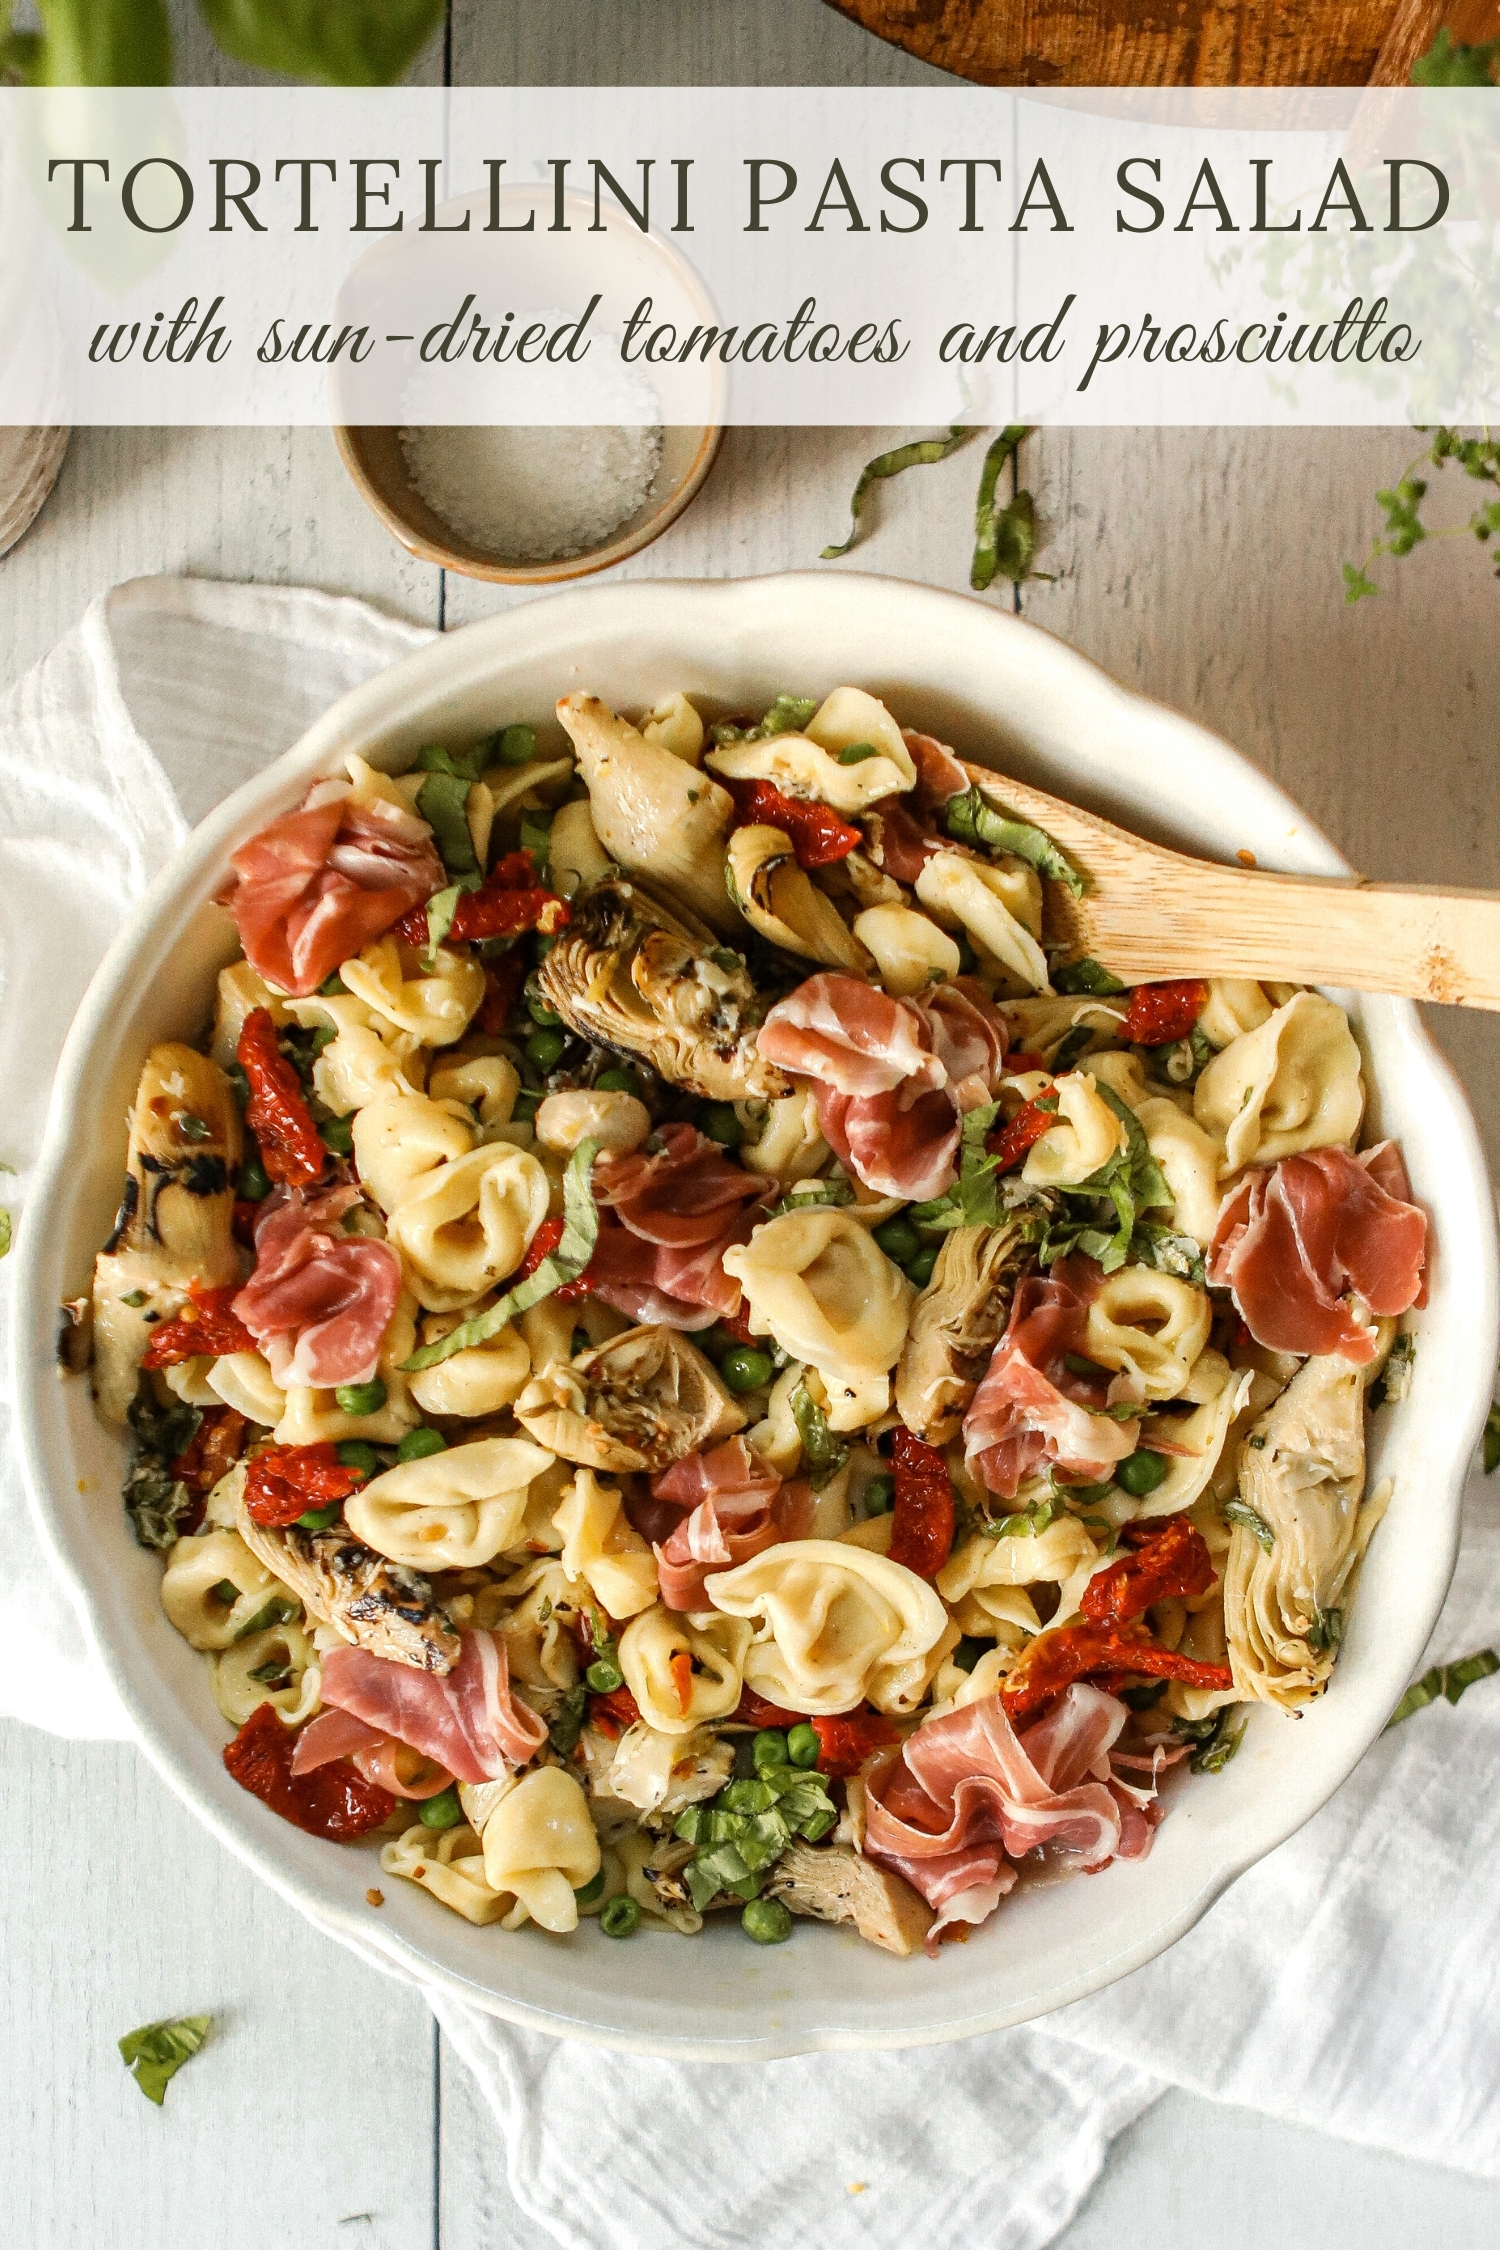 Tortellini Pasta Salad with sun-dried tomatoes and prosciutto 